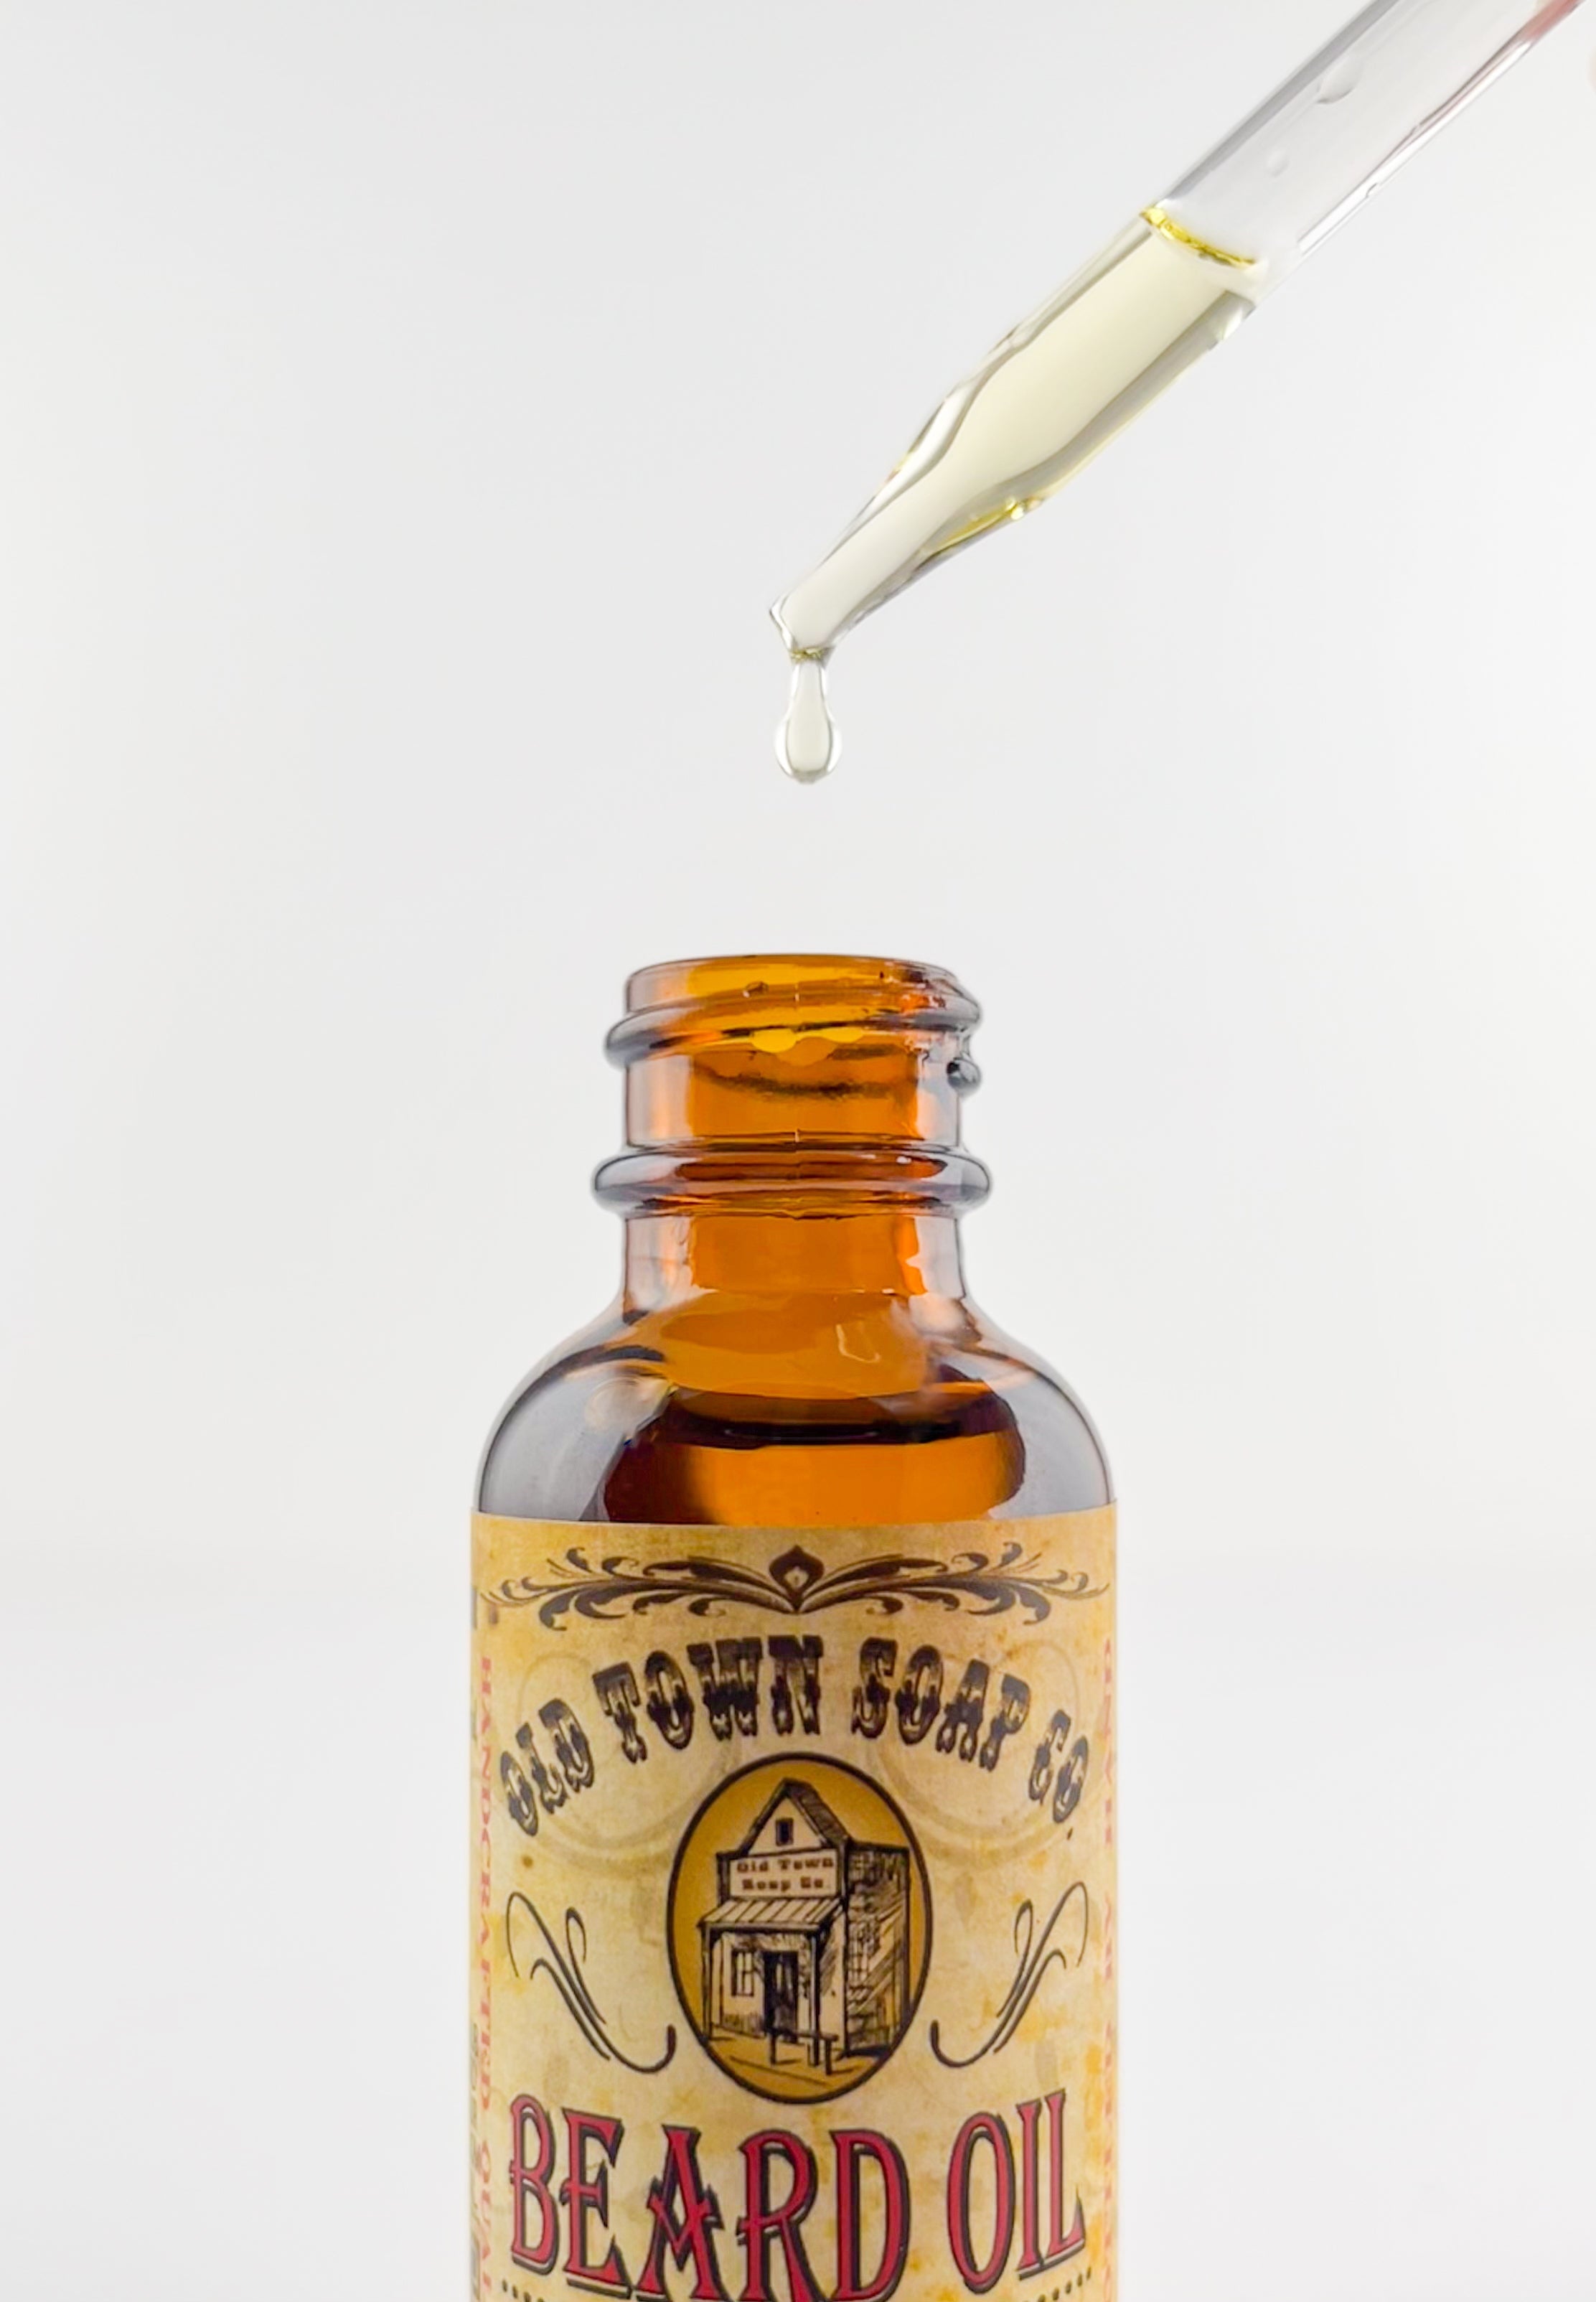 The Southern Man Beard Oil - Old Town Soap Co.